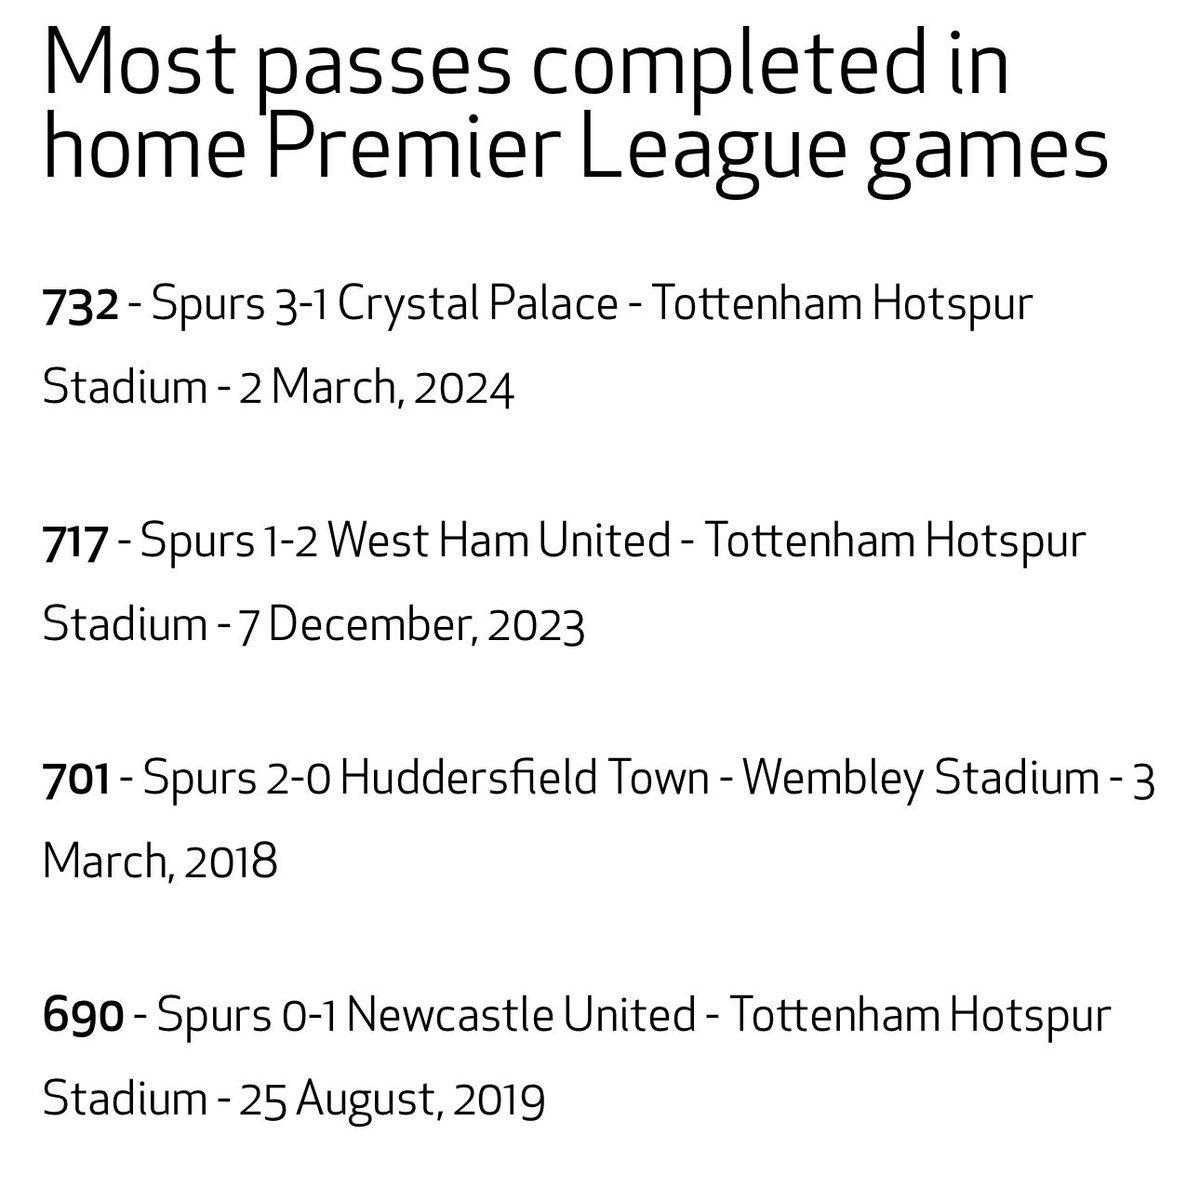 2 out of 4 of these were losses. Spursy.